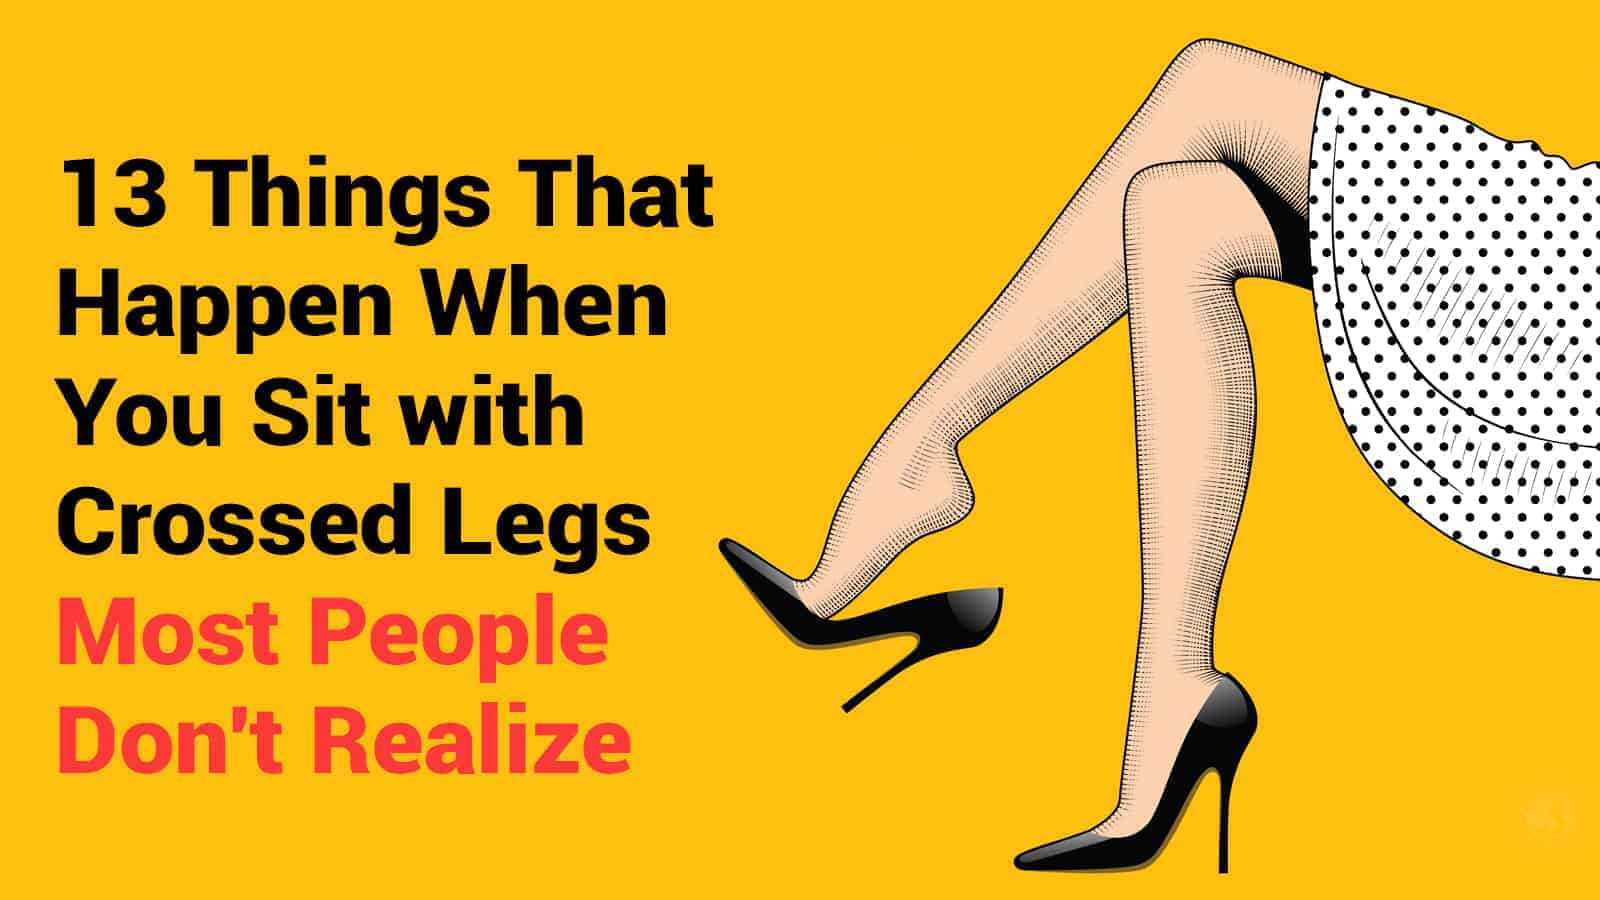 13 Things That Happen When You Sit with Crossed Legs (Most People Don’t Realize)